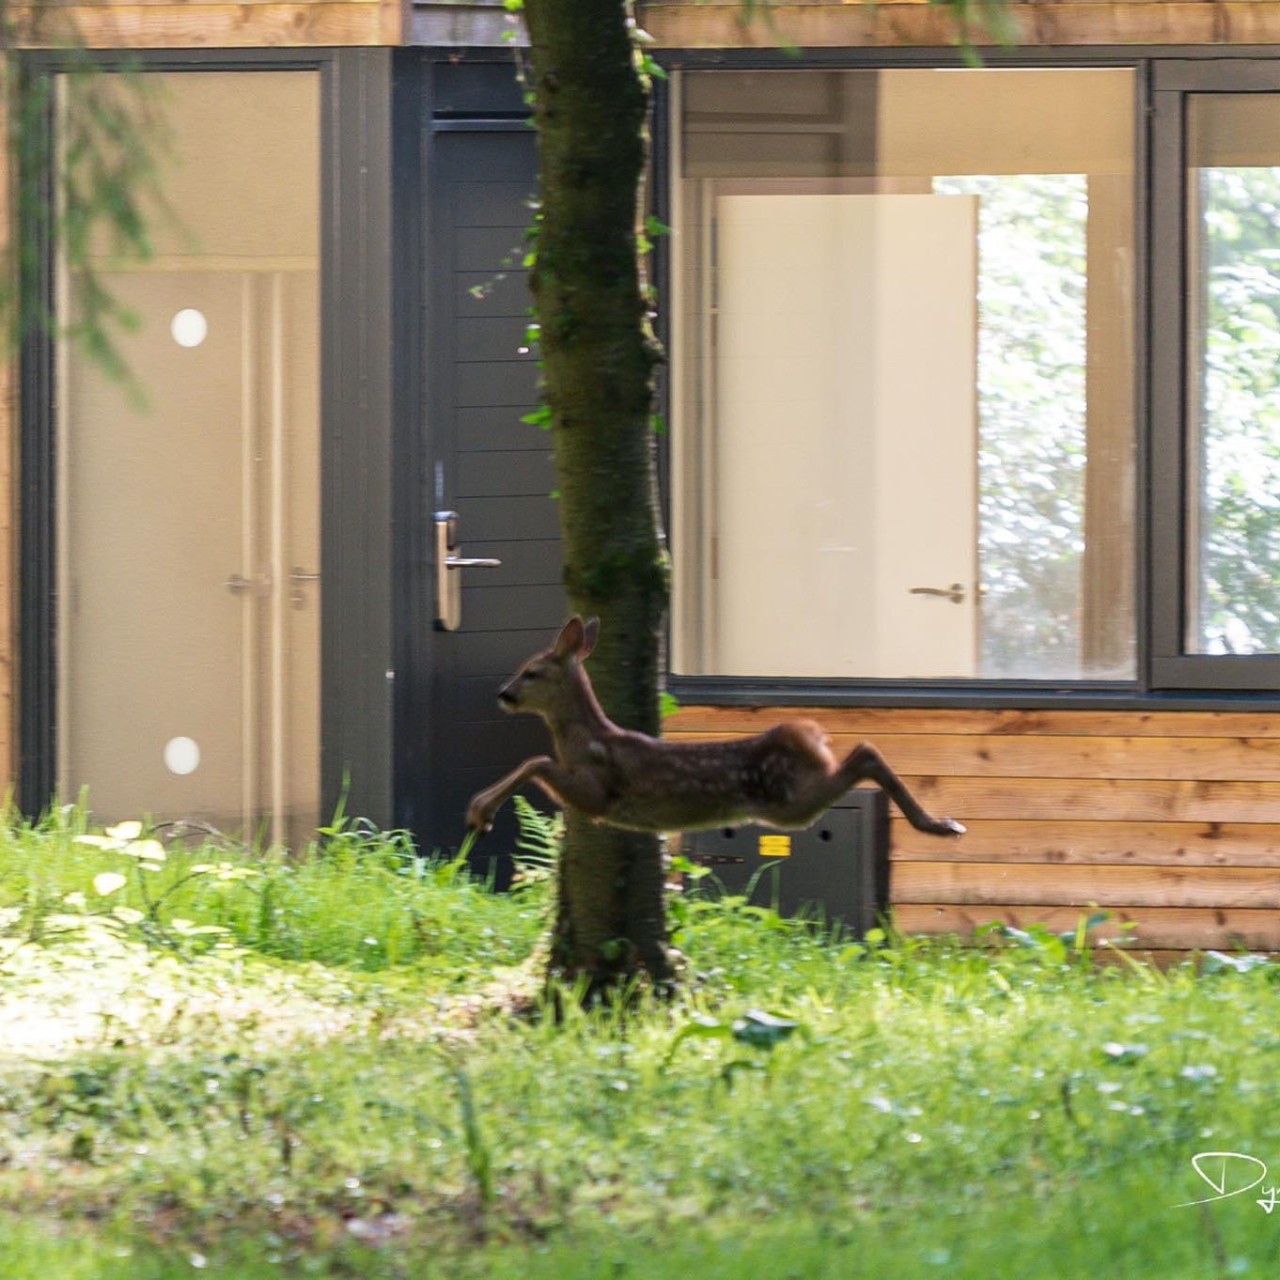 Deer jumps in front of a lodge